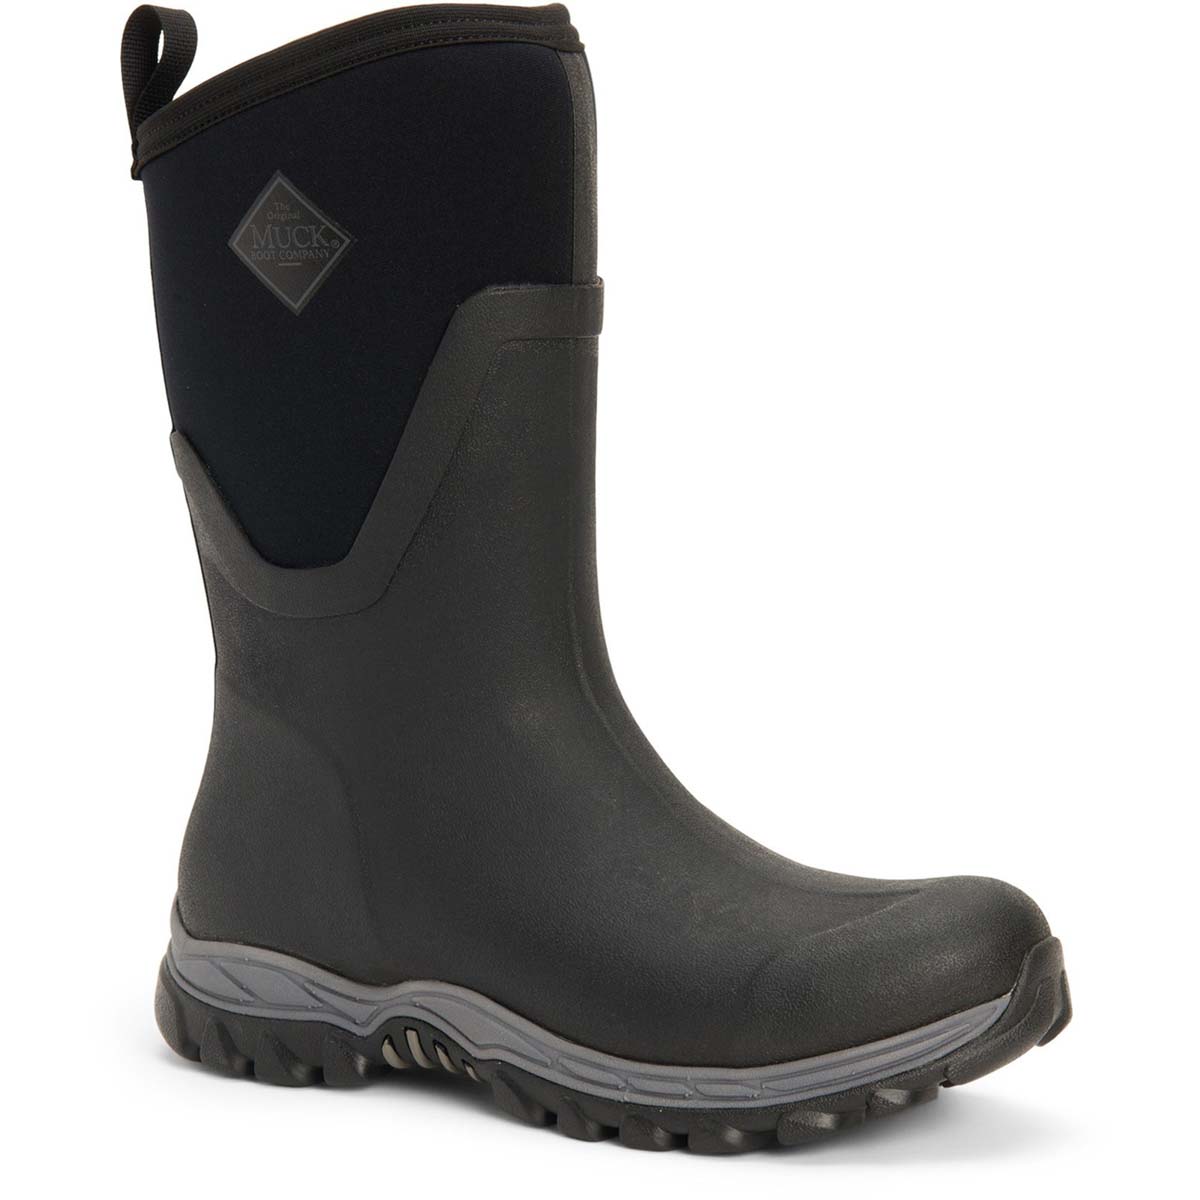 Muck Boots Arctic Sport Mid Black Womens Wellingtons AS2M-000 in a Plain Man-made in Size 7